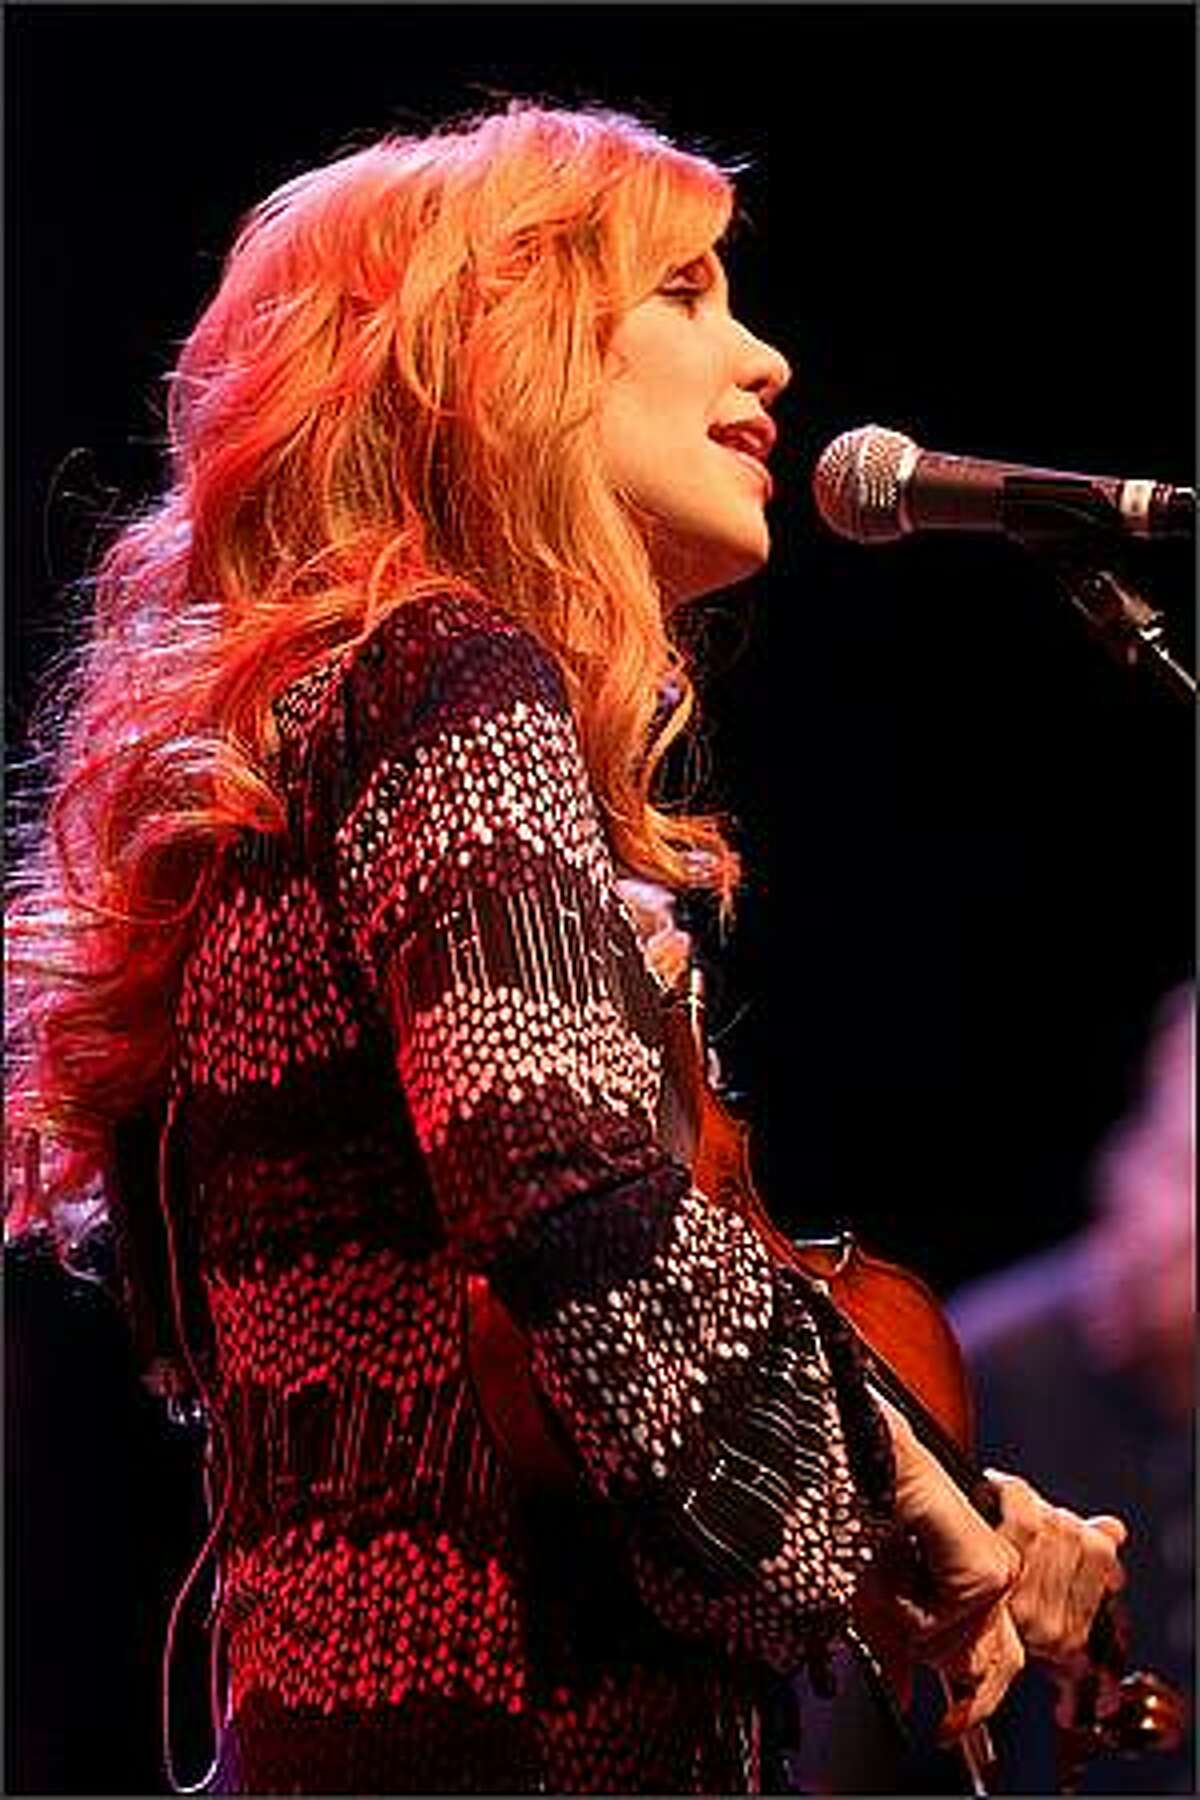 Alison Krauss performs at the WaMu Theater in Seattle on Wednesday.